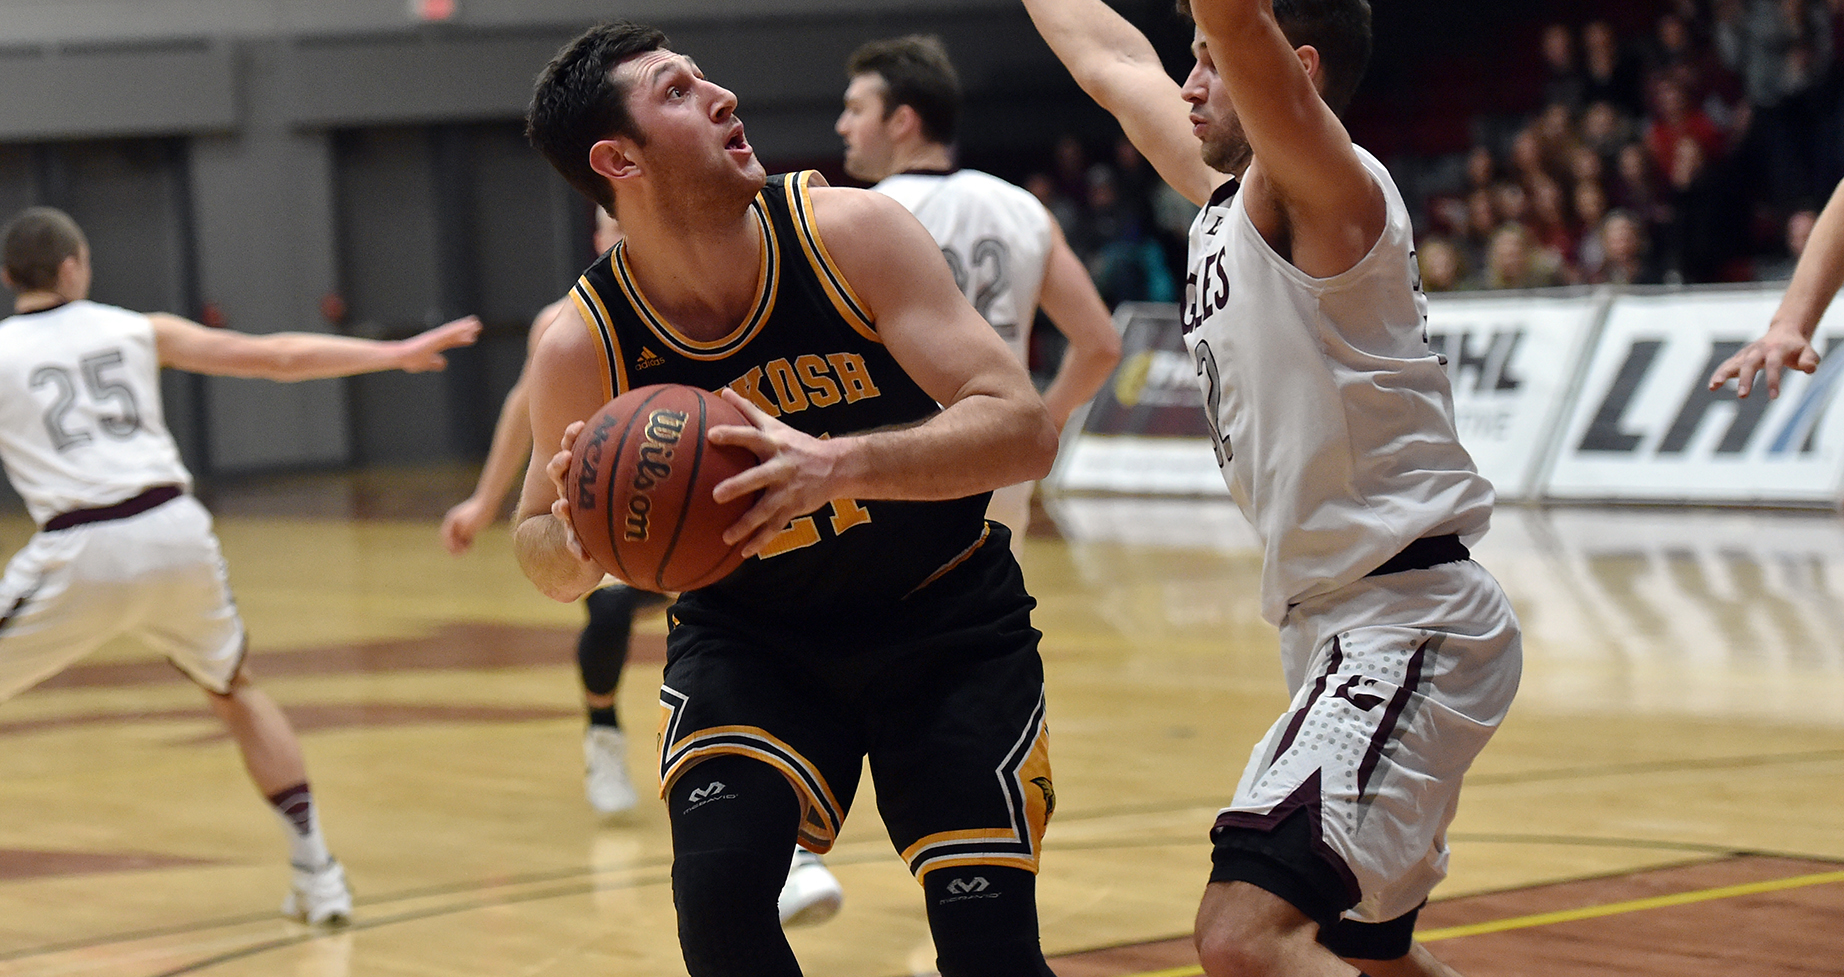 AJ Mueller scored 13 points and grabbed seven rebounds to lead the Titans to their regular-season sweep of the Eagles.